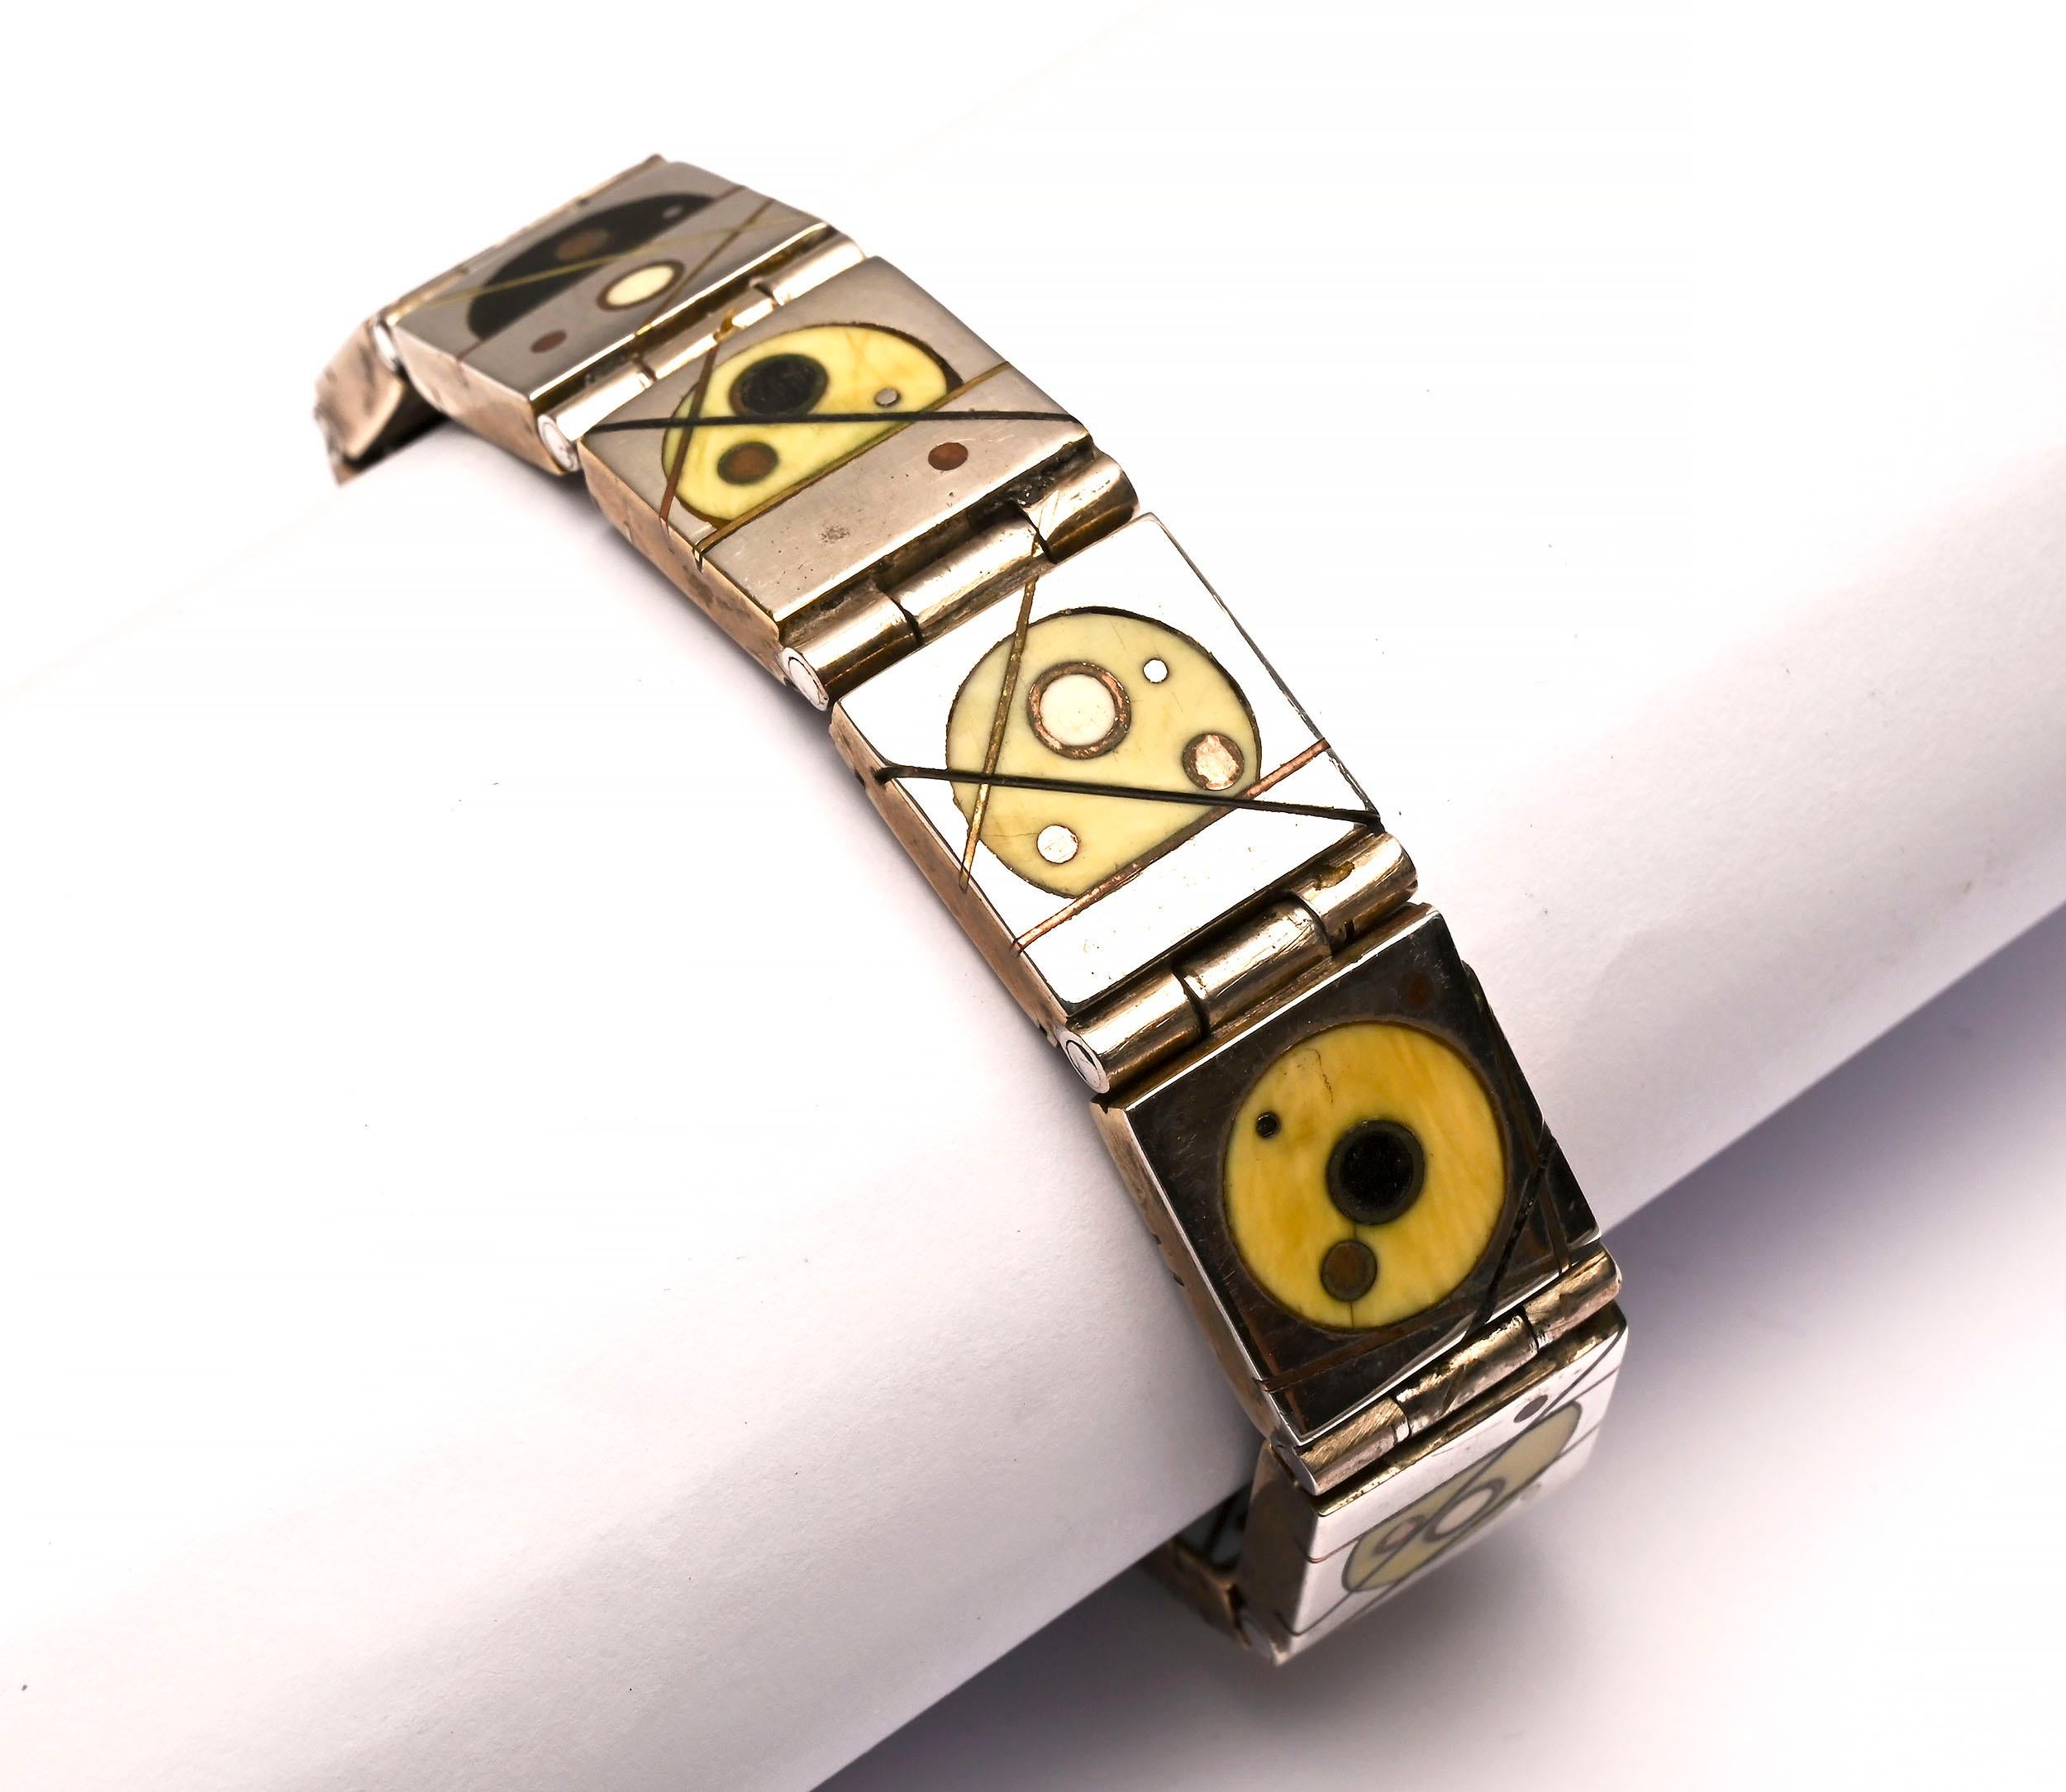 This brilliant, totally reversible bracelet was made by one of the stars of the mid 20th century Modernist jewelry movement, Peter Macchiarini. 
On one side, the nine links are circular designs of onyx; brass; copper and bone on sterling silver.